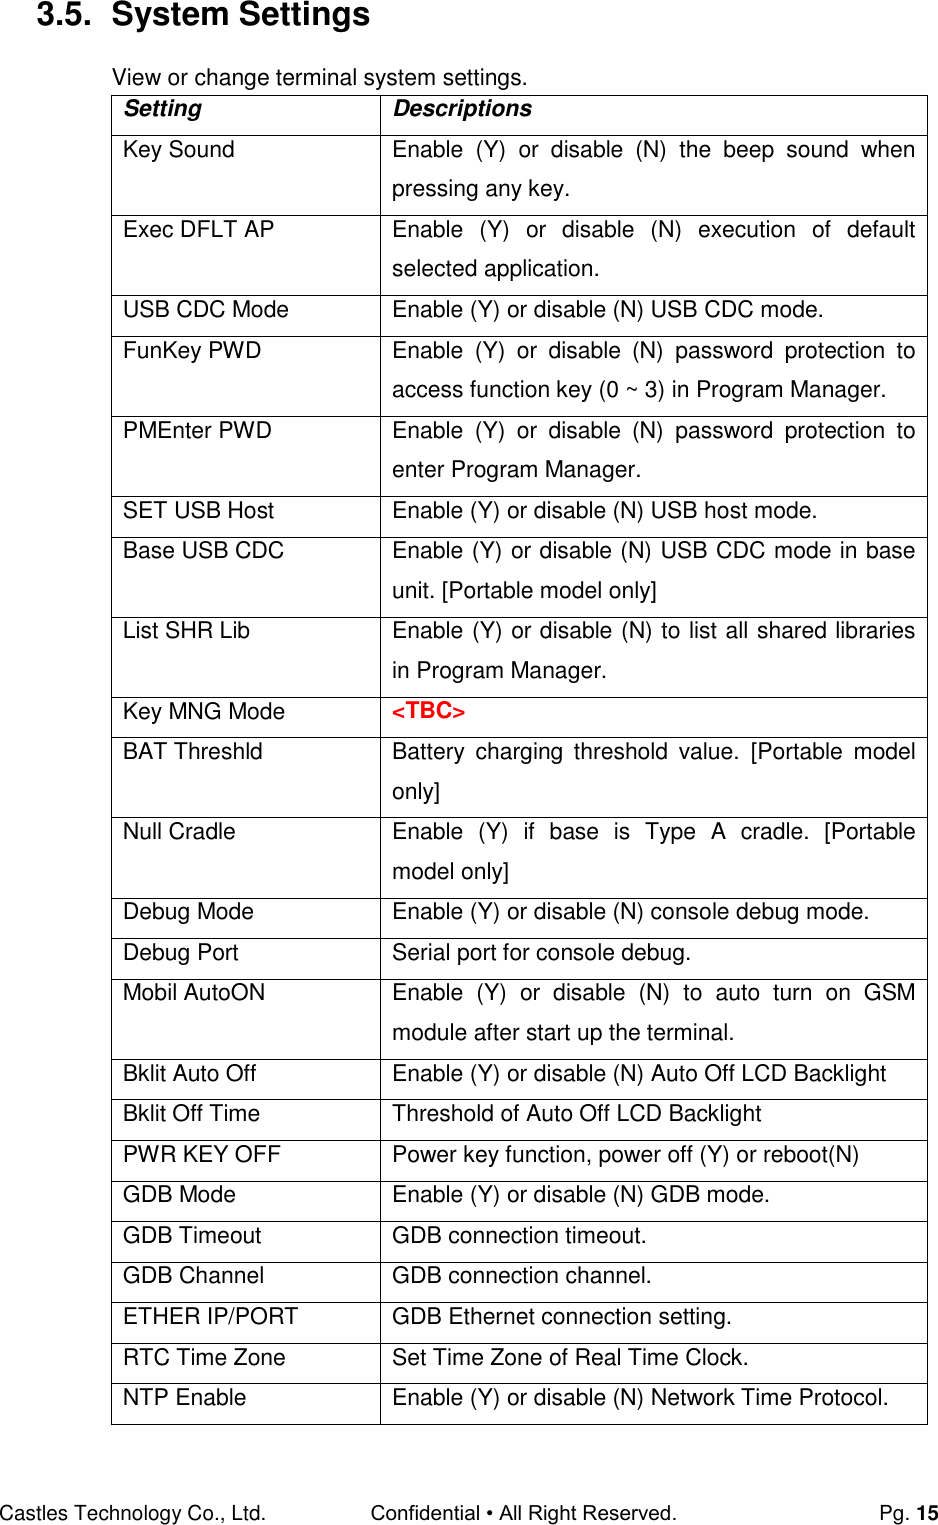 Castles Technology Co., Ltd. Confidential • All Right Reserved.  Pg. 15 3.5.  System Settings View or change terminal system settings. Setting Descriptions Key Sound Enable  (Y)  or  disable  (N)  the  beep  sound  when pressing any key. Exec DFLT AP Enable  (Y)  or  disable  (N)  execution  of  default selected application. USB CDC Mode Enable (Y) or disable (N) USB CDC mode. FunKey PWD Enable  (Y)  or  disable  (N)  password  protection  to access function key (0 ~ 3) in Program Manager. PMEnter PWD Enable  (Y)  or  disable  (N)  password  protection  to enter Program Manager. SET USB Host Enable (Y) or disable (N) USB host mode. Base USB CDC Enable (Y) or disable (N) USB CDC mode in base unit. [Portable model only] List SHR Lib Enable (Y) or disable (N) to list all shared libraries in Program Manager. Key MNG Mode &lt;TBC&gt; BAT Threshld Battery  charging  threshold  value.  [Portable  model only] Null Cradle Enable  (Y)  if  base  is  Type  A  cradle.  [Portable model only] Debug Mode Enable (Y) or disable (N) console debug mode. Debug Port Serial port for console debug. Mobil AutoON Enable  (Y)  or  disable  (N)  to  auto  turn  on  GSM module after start up the terminal. Bklit Auto Off Enable (Y) or disable (N) Auto Off LCD Backlight Bklit Off Time Threshold of Auto Off LCD Backlight PWR KEY OFF Power key function, power off (Y) or reboot(N)  GDB Mode Enable (Y) or disable (N) GDB mode. GDB Timeout GDB connection timeout. GDB Channel GDB connection channel. ETHER IP/PORT GDB Ethernet connection setting. RTC Time Zone Set Time Zone of Real Time Clock. NTP Enable Enable (Y) or disable (N) Network Time Protocol. 